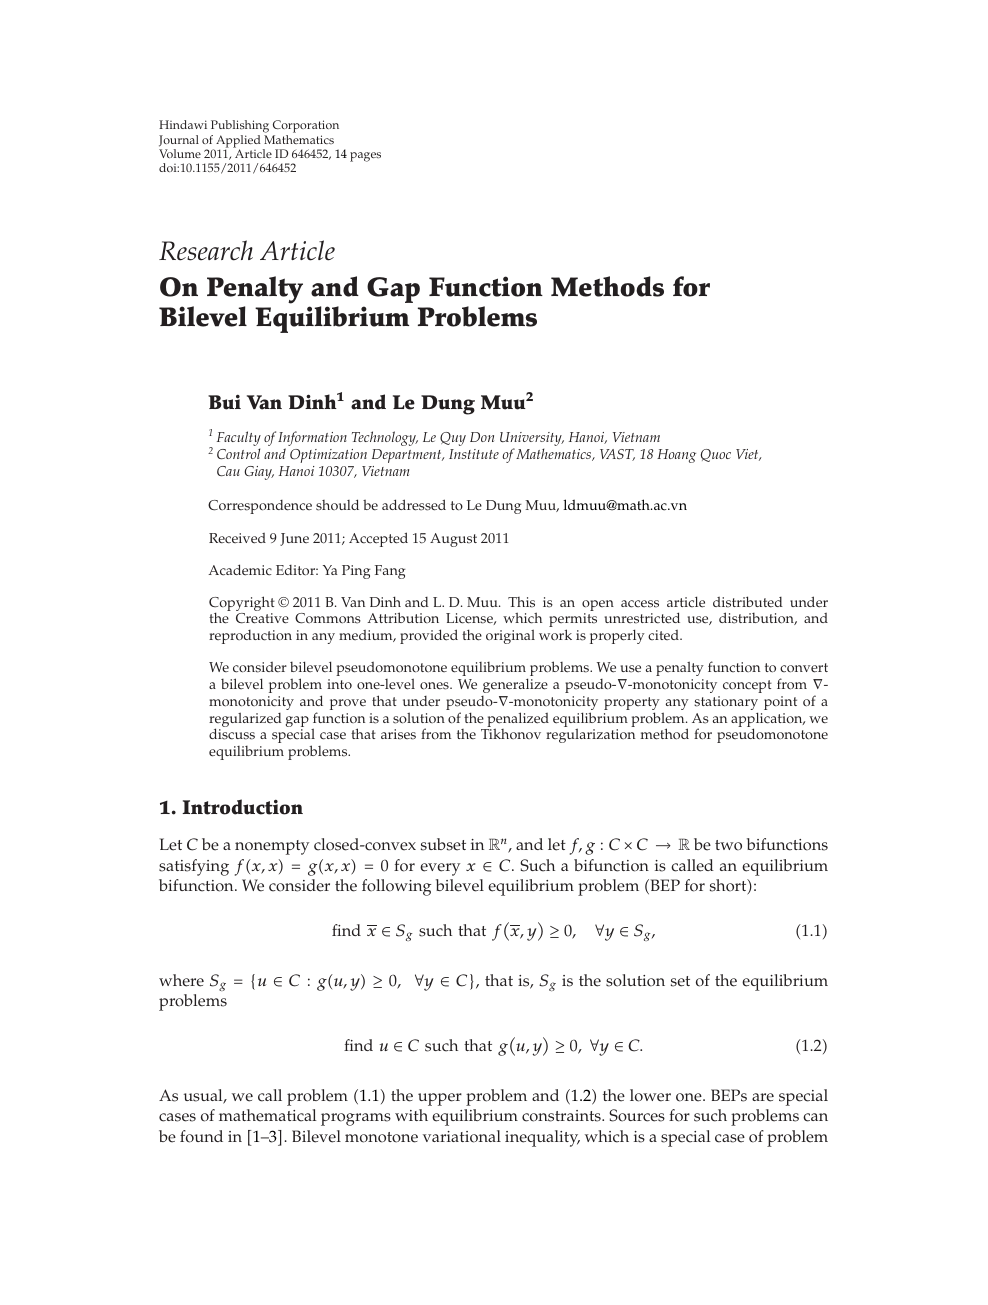 On Penalty And Gap Function Methods For Bilevel Equilibrium Problems Topic Of Research Paper In Mathematics Download Scholarly Article Pdf And Read For Free On Cyberleninka Open Science Hub